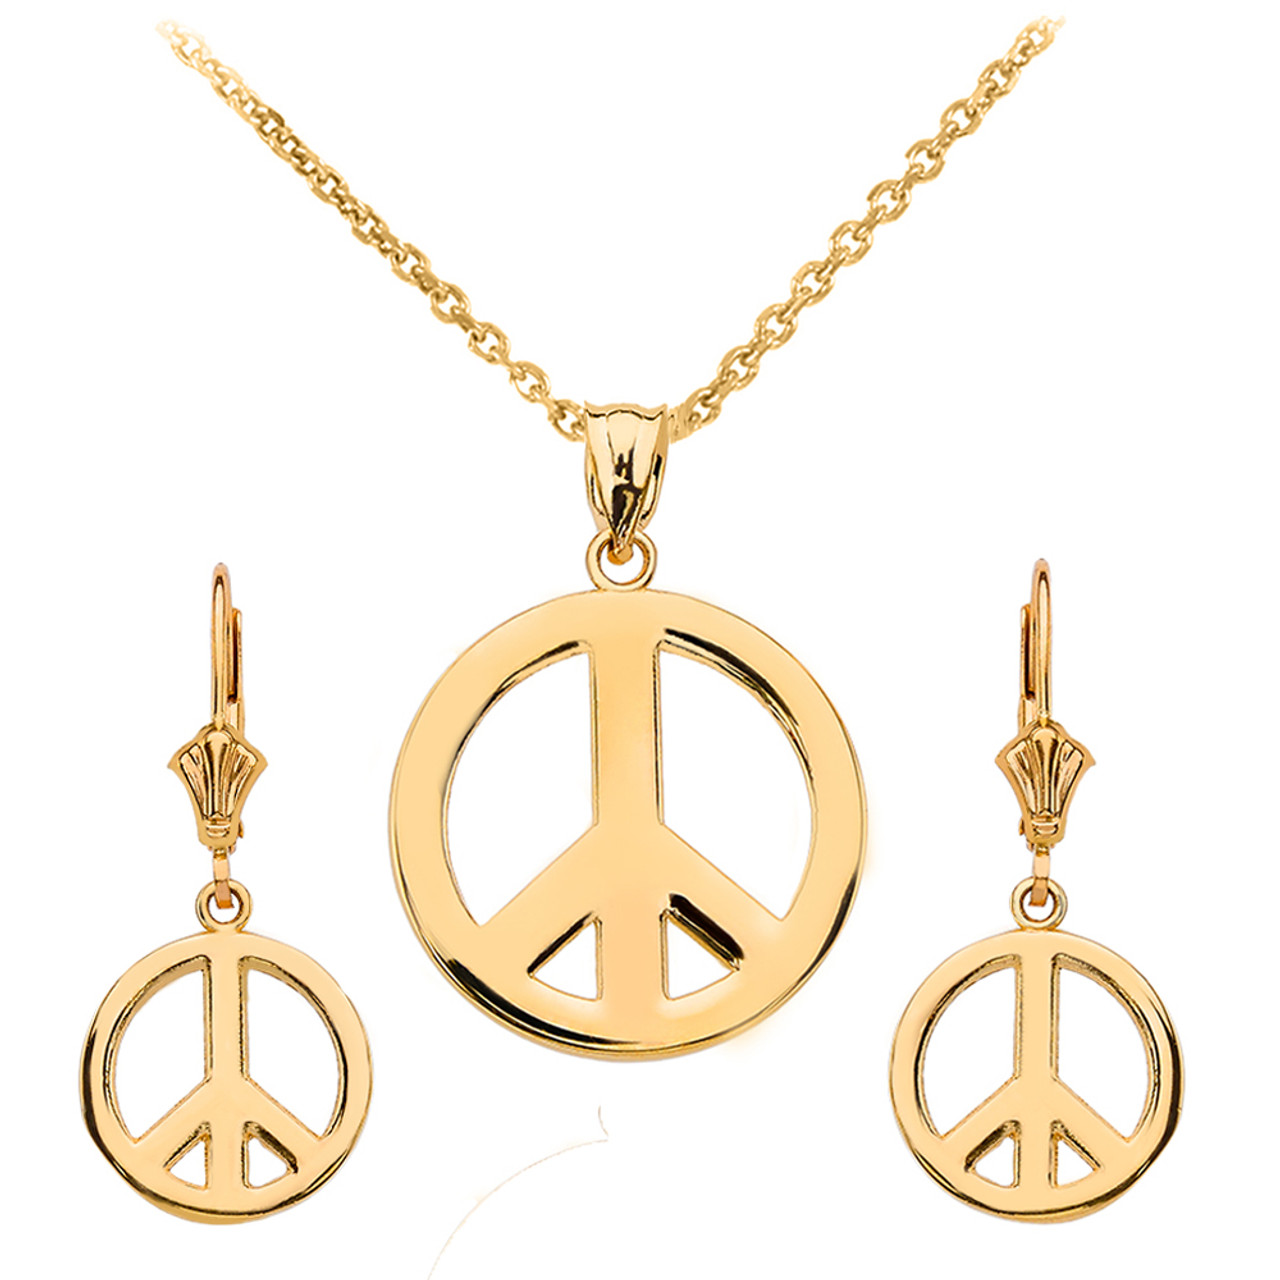 Mj Ragav Hollow Peace Symbol Pendant with Leather Chain for Party Wear  College for Boys/ Men Stone Pendant Price in India - Buy Mj Ragav Hollow Peace  Symbol Pendant with Leather Chain